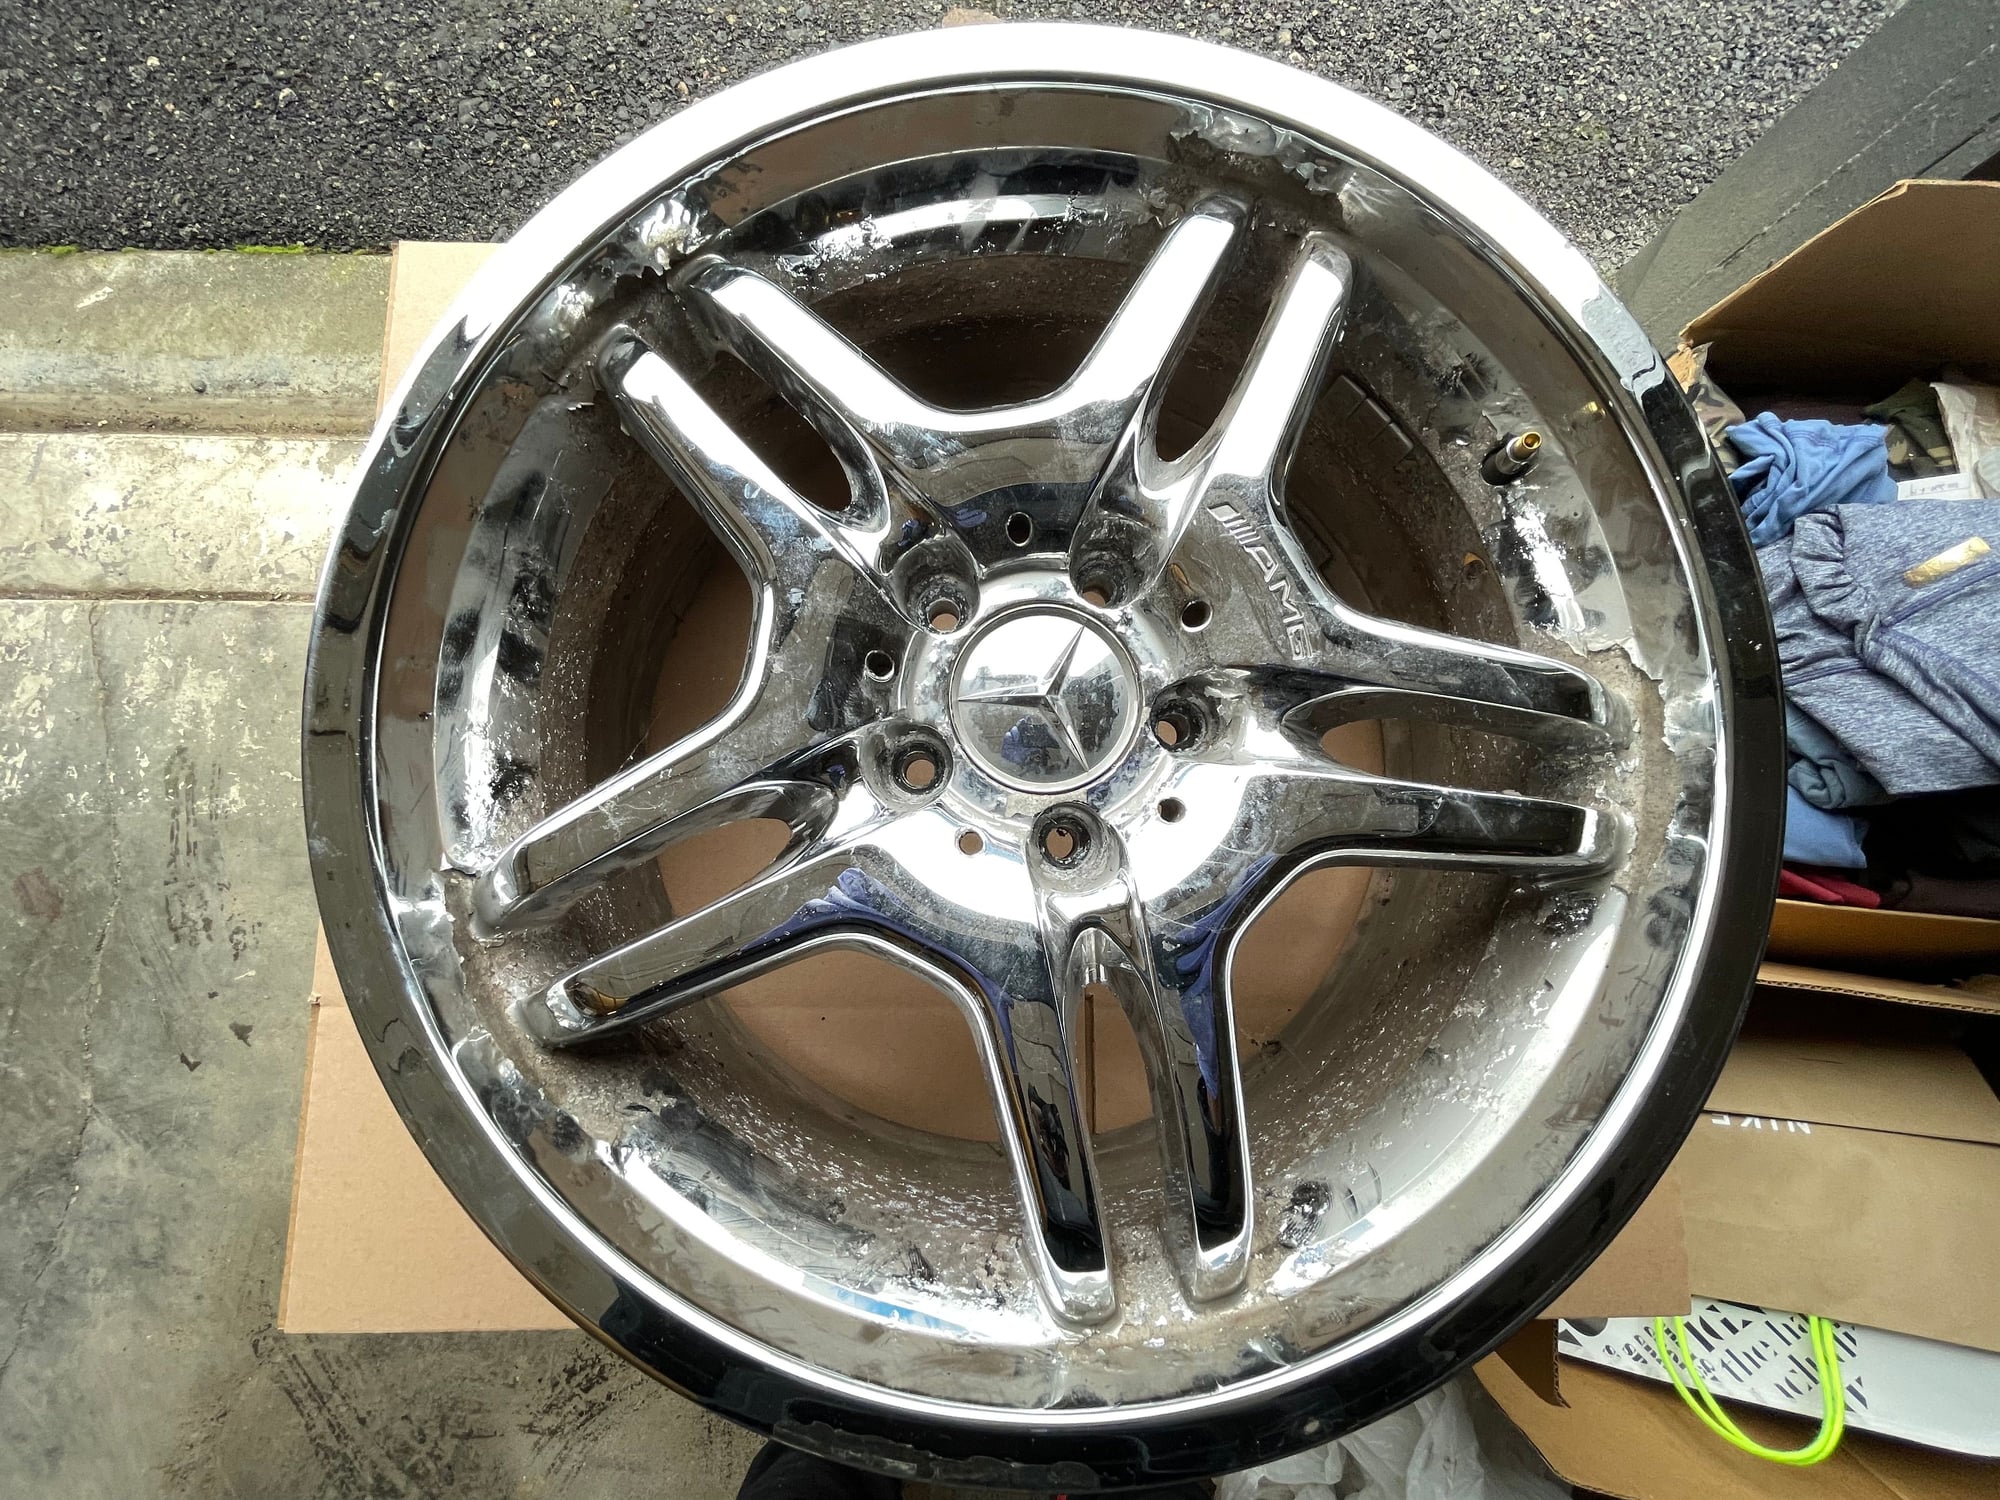 Wheels and Tires/Axles - Chrome OEM 18" C55 / CLK55 AMG Wheels - Used - 2003 to 2009 Mercedes-Benz CLK55 AMG - Portland, OR 97209, United States